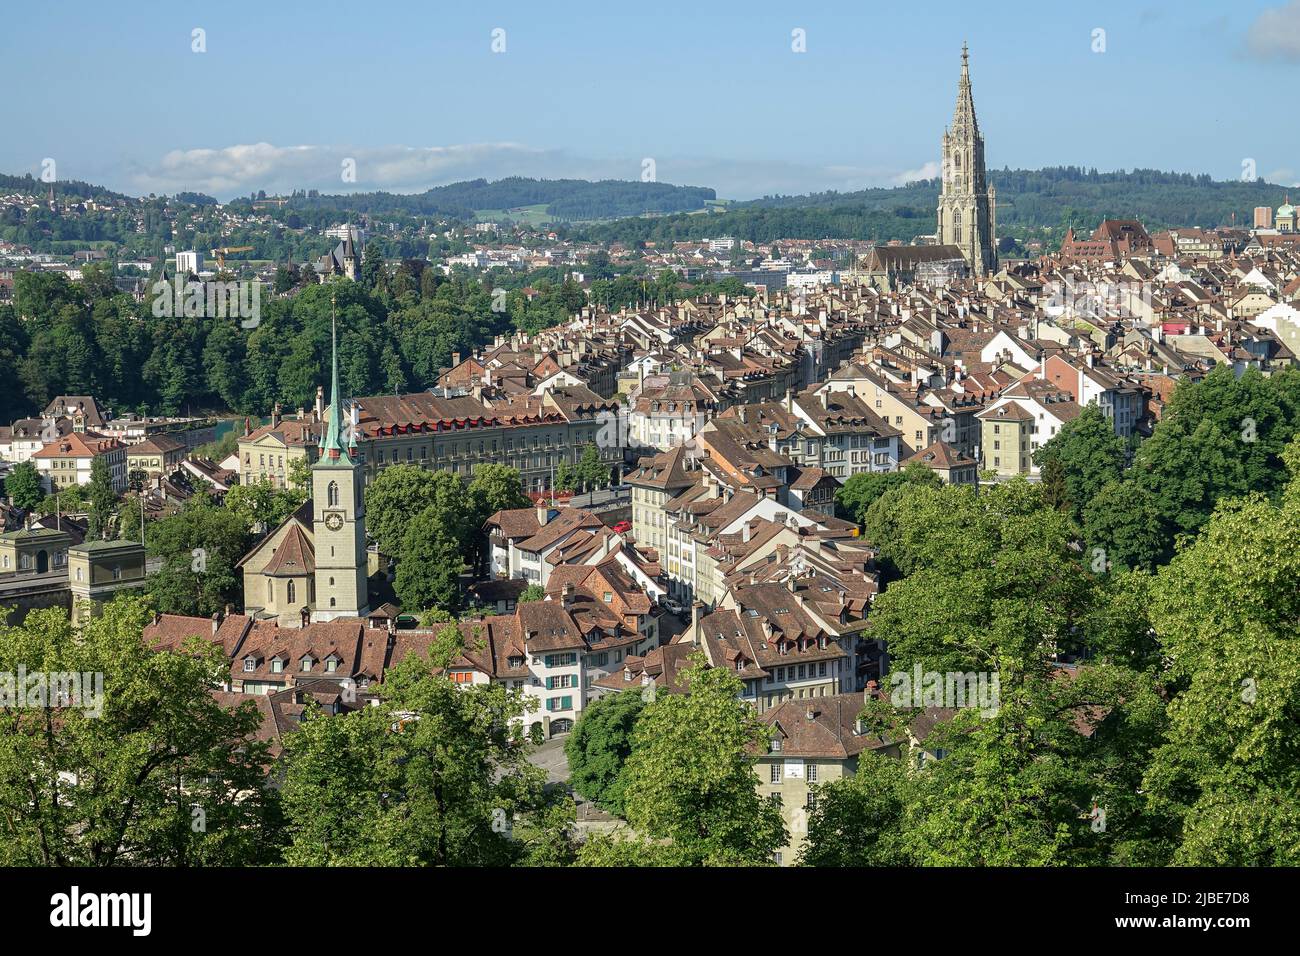 Panorama view of Berne old town from top in rose garden Stock Photo